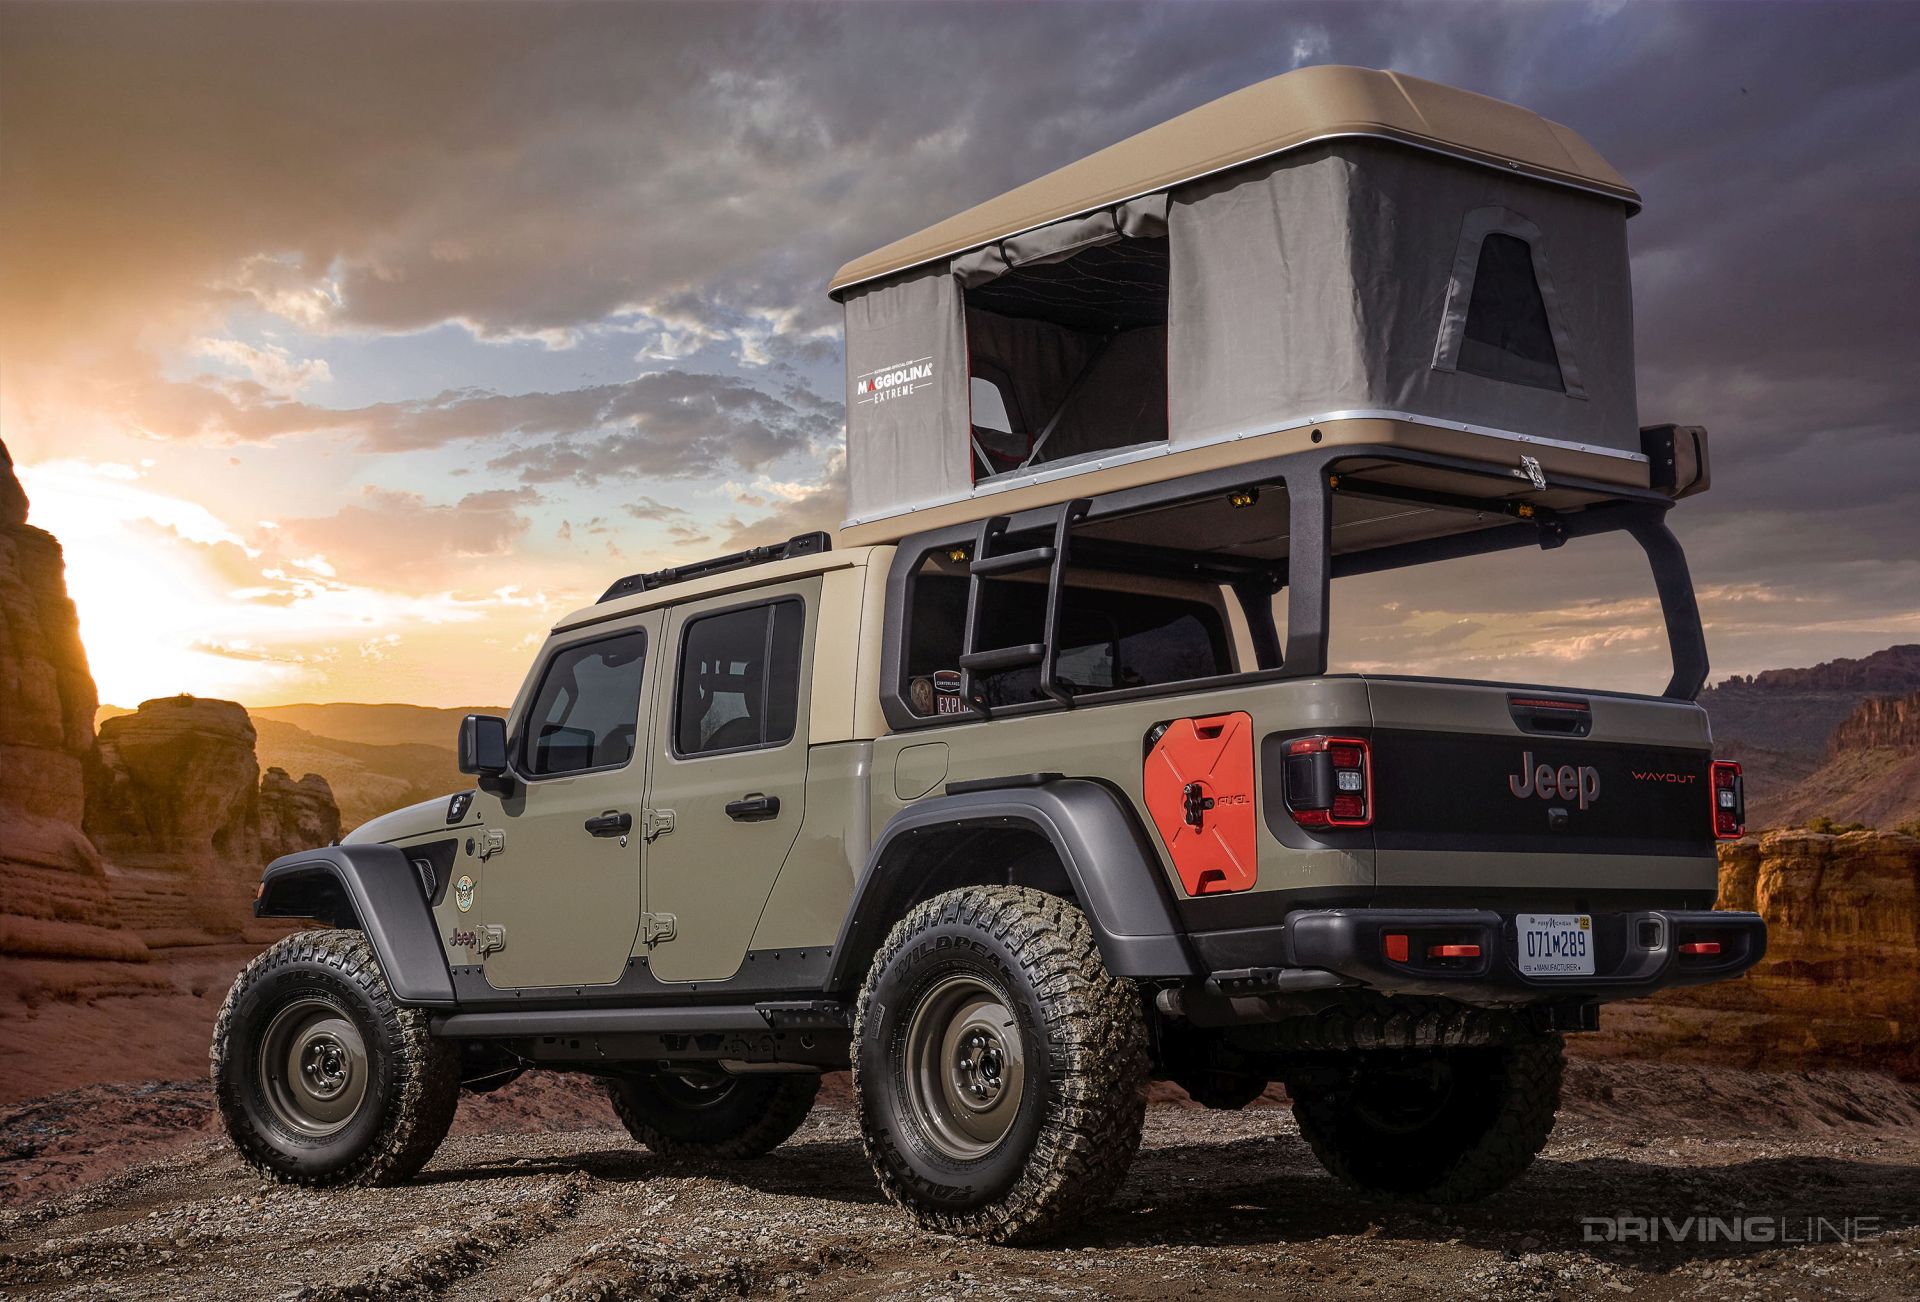 The Ultimate Overland Jeep Gladiator is Coming | DrivingLine